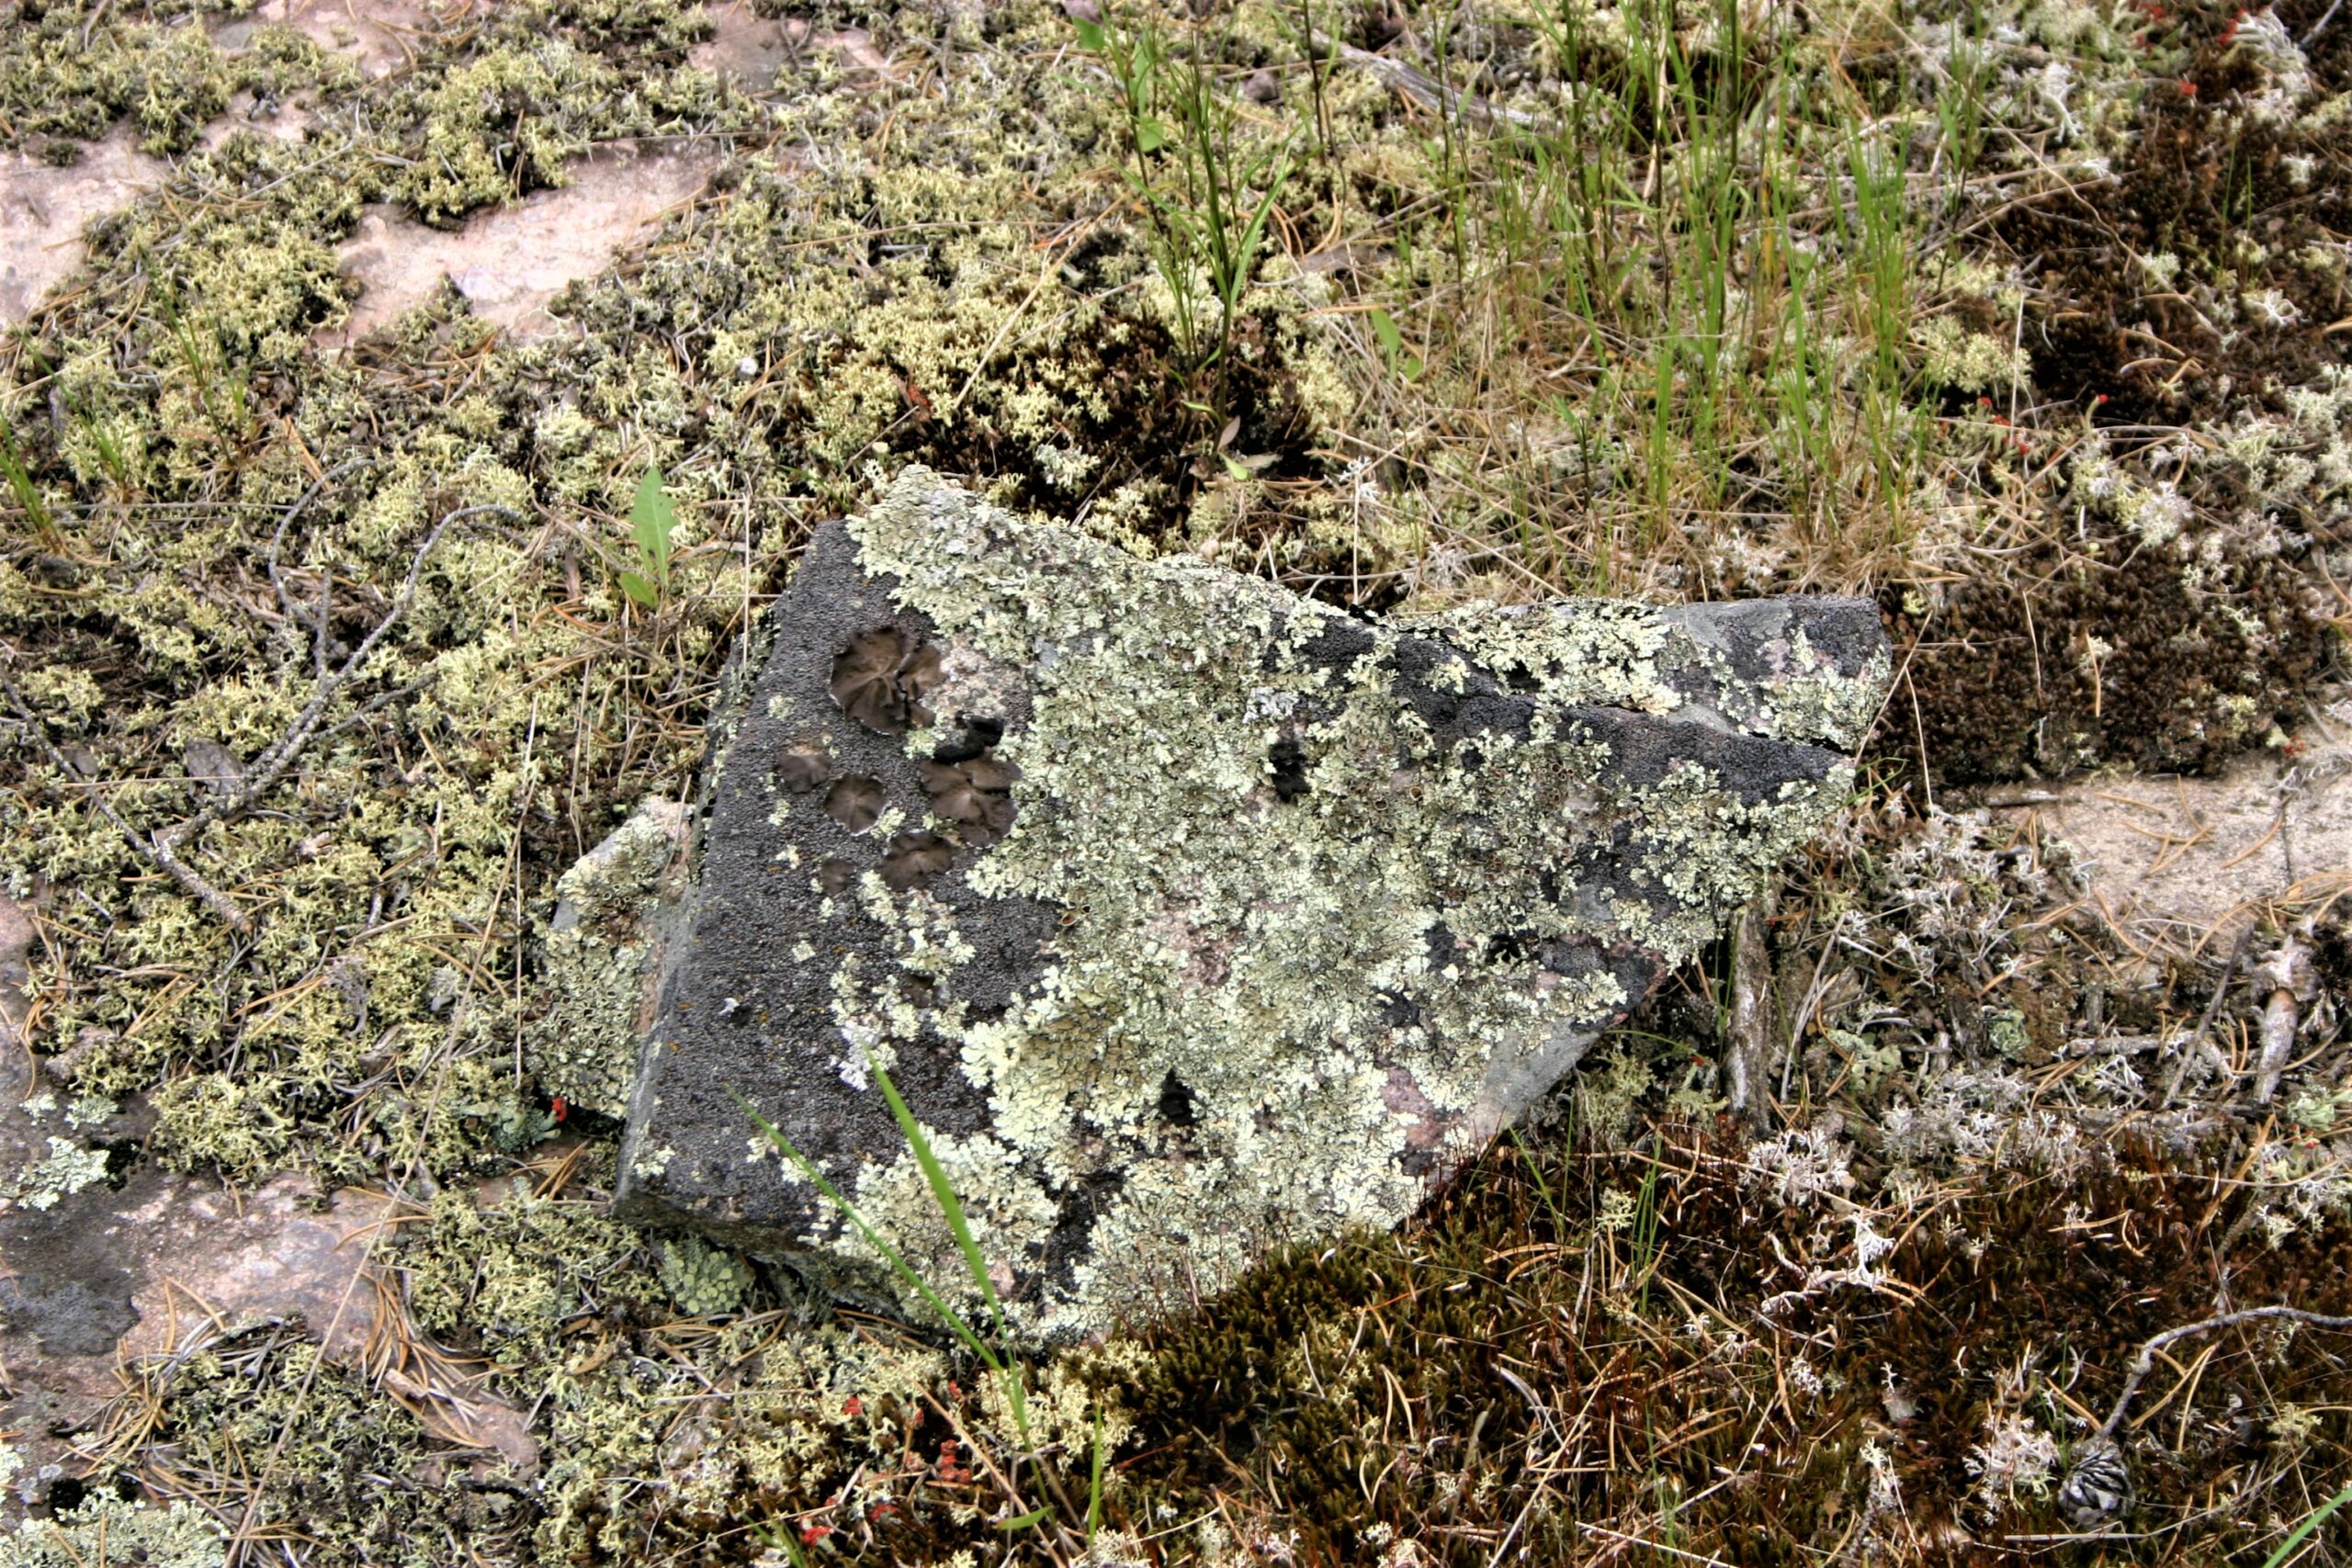 A grey angular rock with green-white lichens growing on it and the surrounding ground.